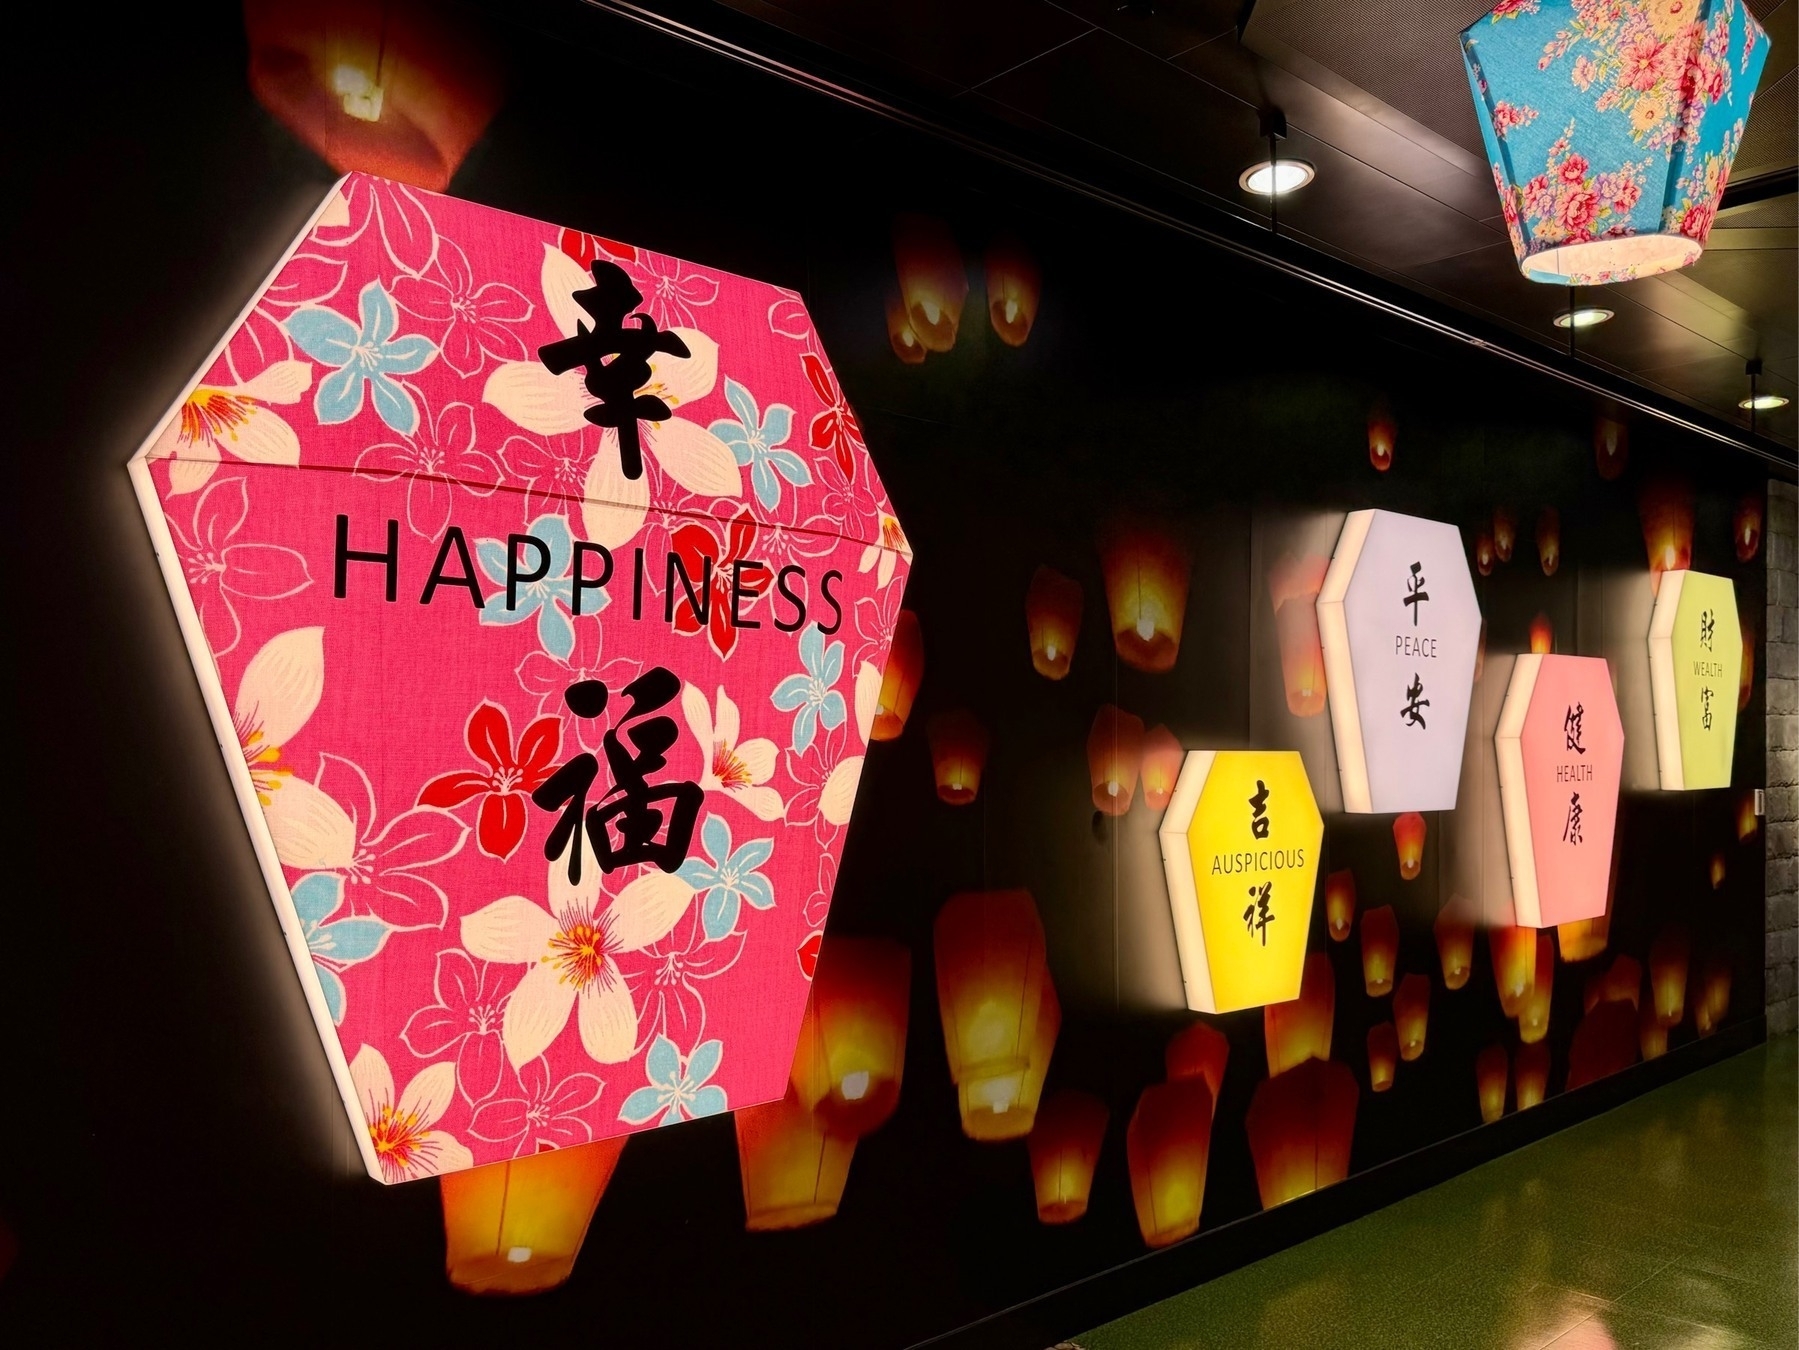 A lighted wall design of sky lanterns, the largest and closest in pink with flowers, having the English word Happiness and the associated Chinese characters